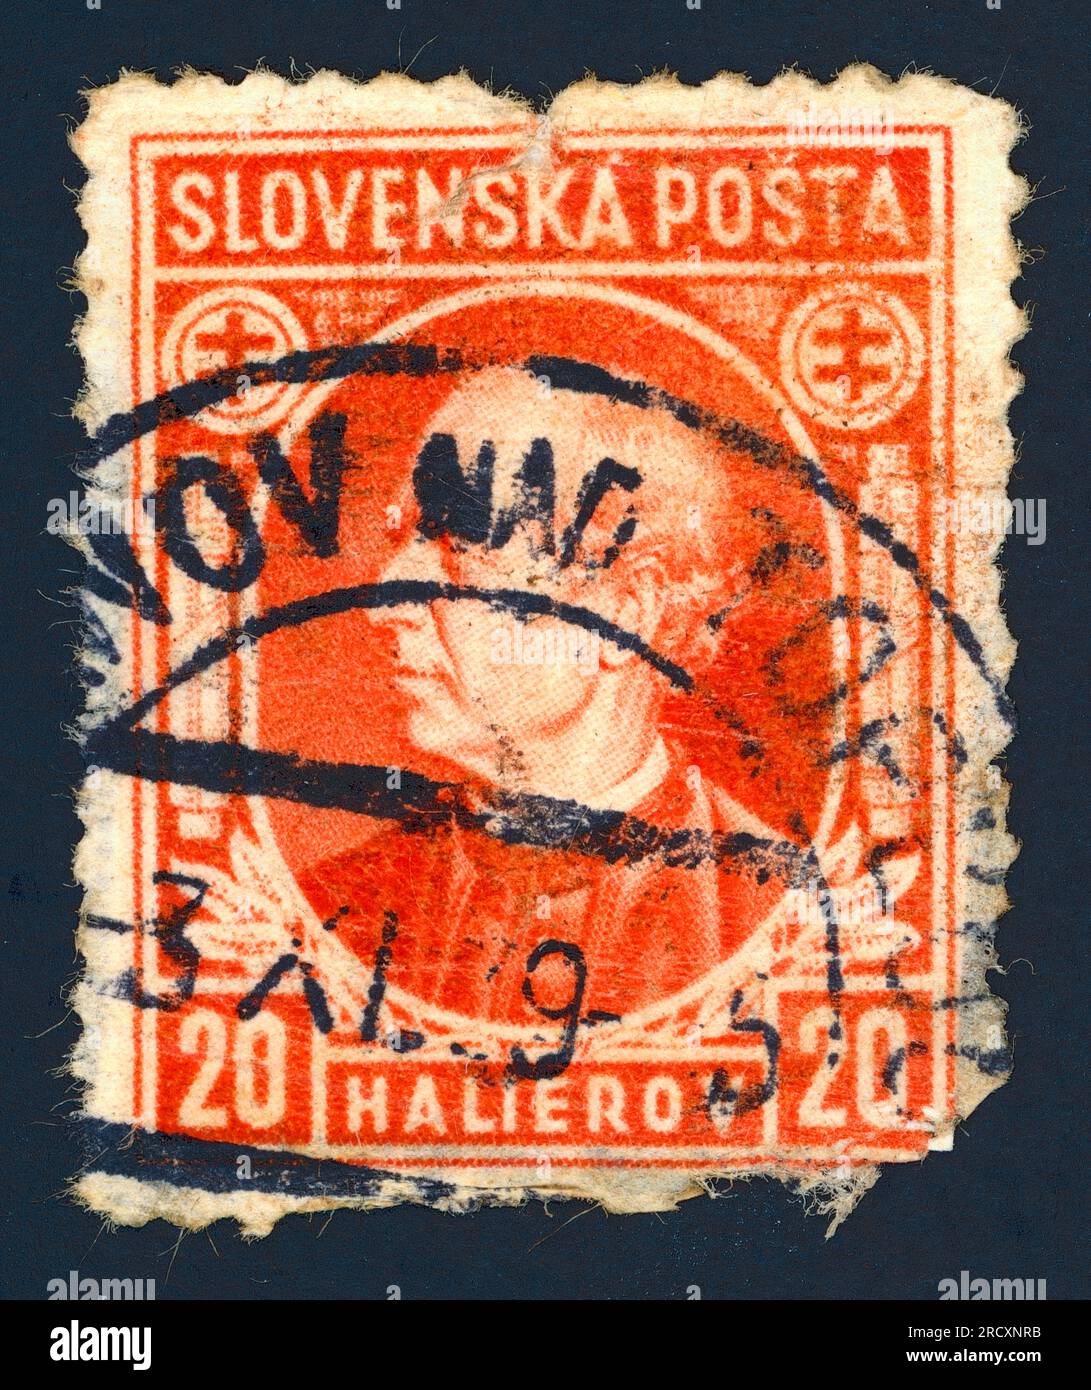 Andrej Hlinka (born András Hlinka (1864 – 1938) was a Slovak Catholic priest, journalist, banker, politician, and one of the most important Slovakian public activists in Czechoslovakia before the Second World War. A stamp issued in the First Slovak Republic (1939 – 1945). Stock Photo